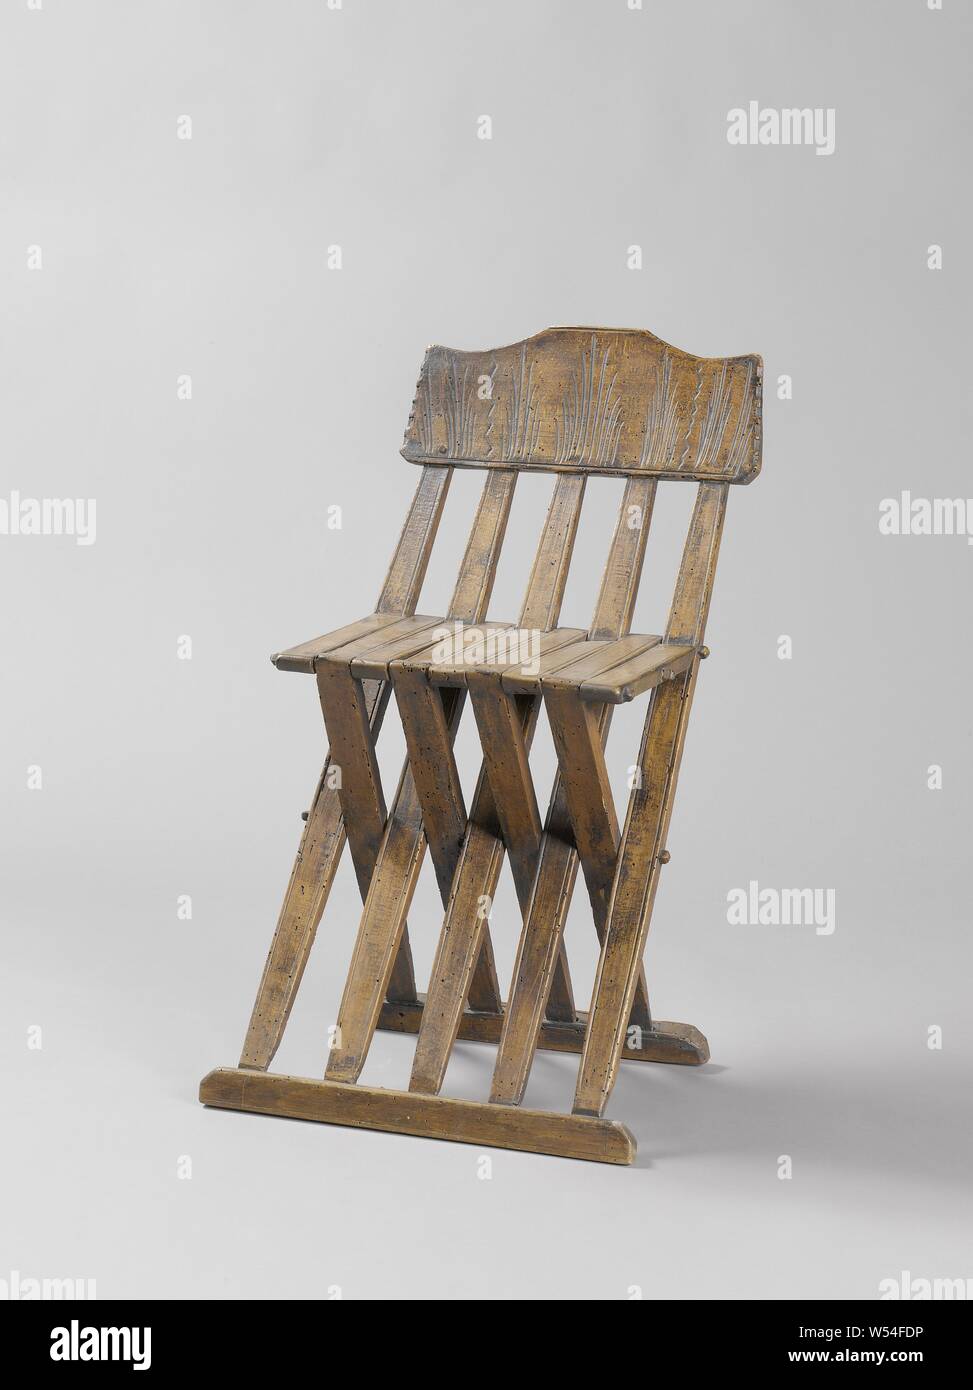 Beech Wood Folding Chair With Five Slats In The Back And